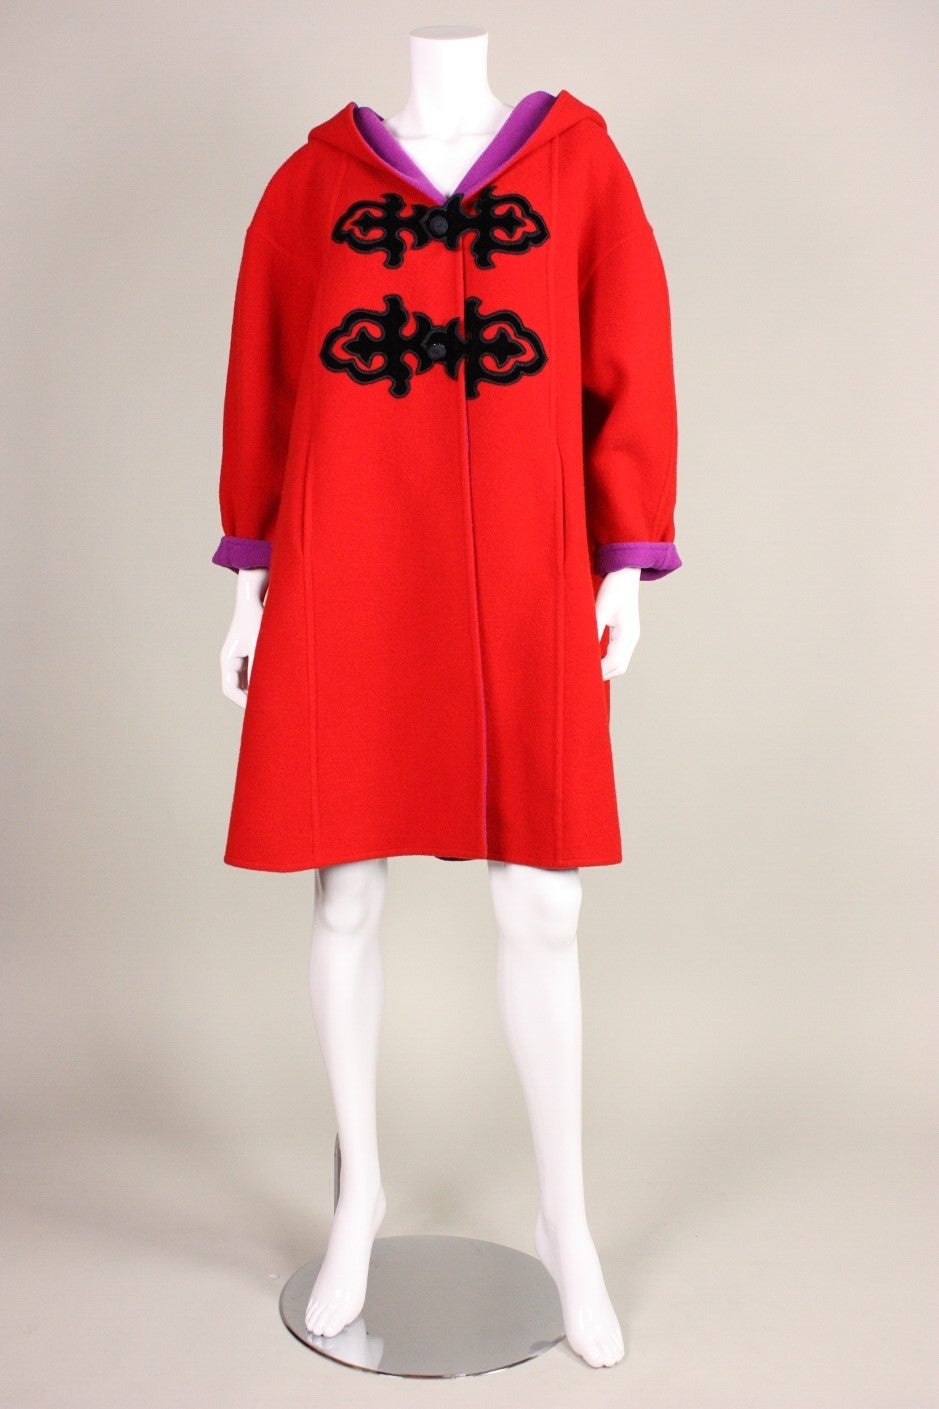 Christian Lacroix coat dates to the 1990's and is made of bright red wool with black velvet appliques.  Drop shoulder.  Tapered sleeves.  Center front snap closures.  Bright magenta wool lining.  Hip pockets.

Labeled size 36, but could